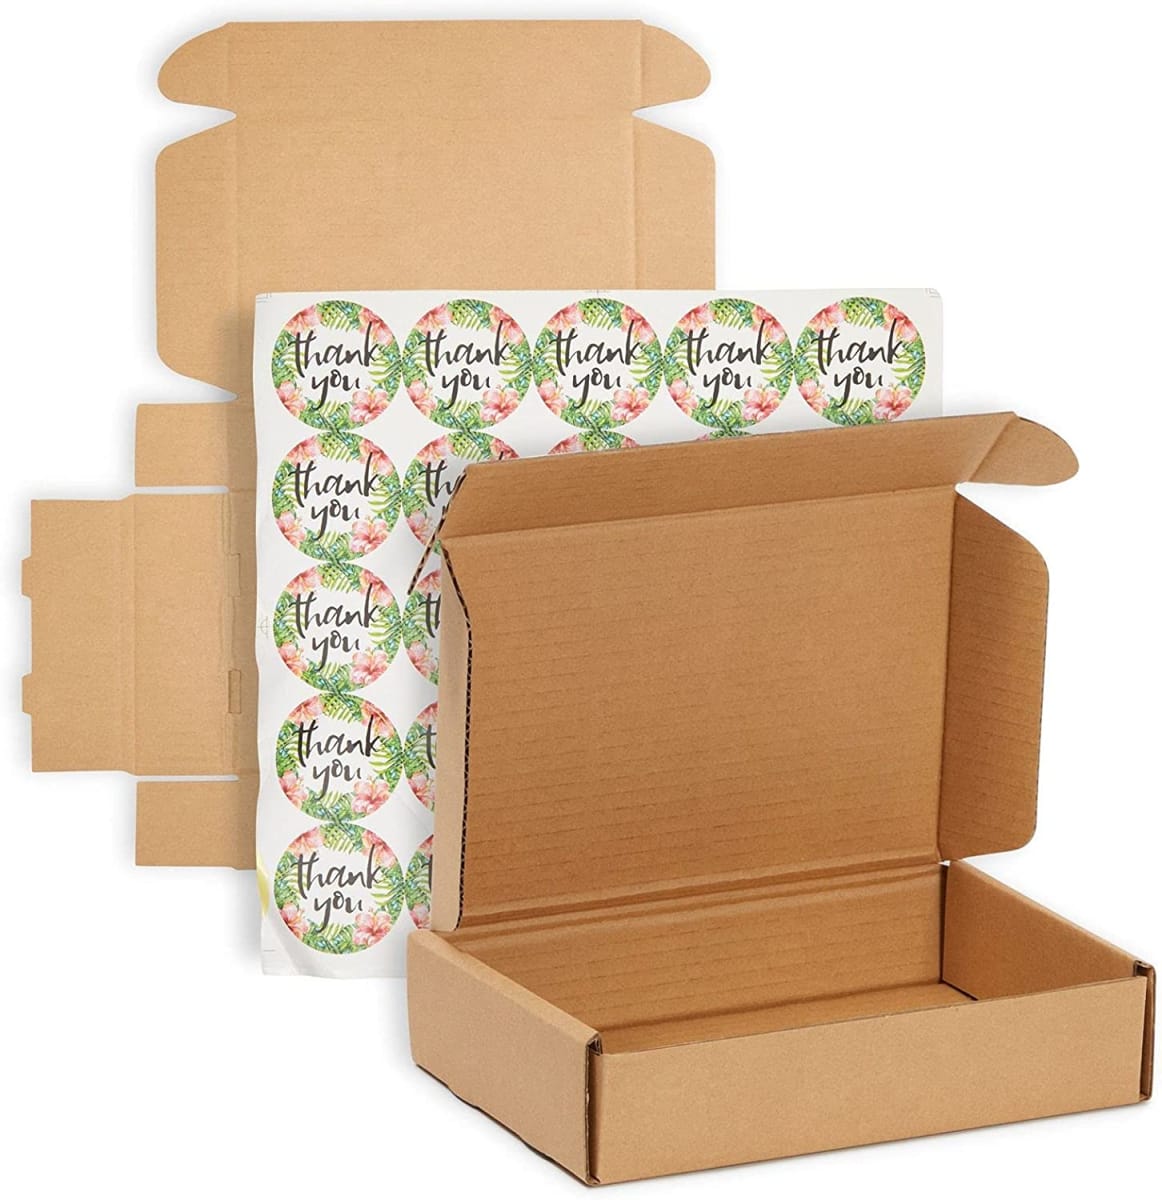 Corrugated Shipping Boxes and Thank You Stickers